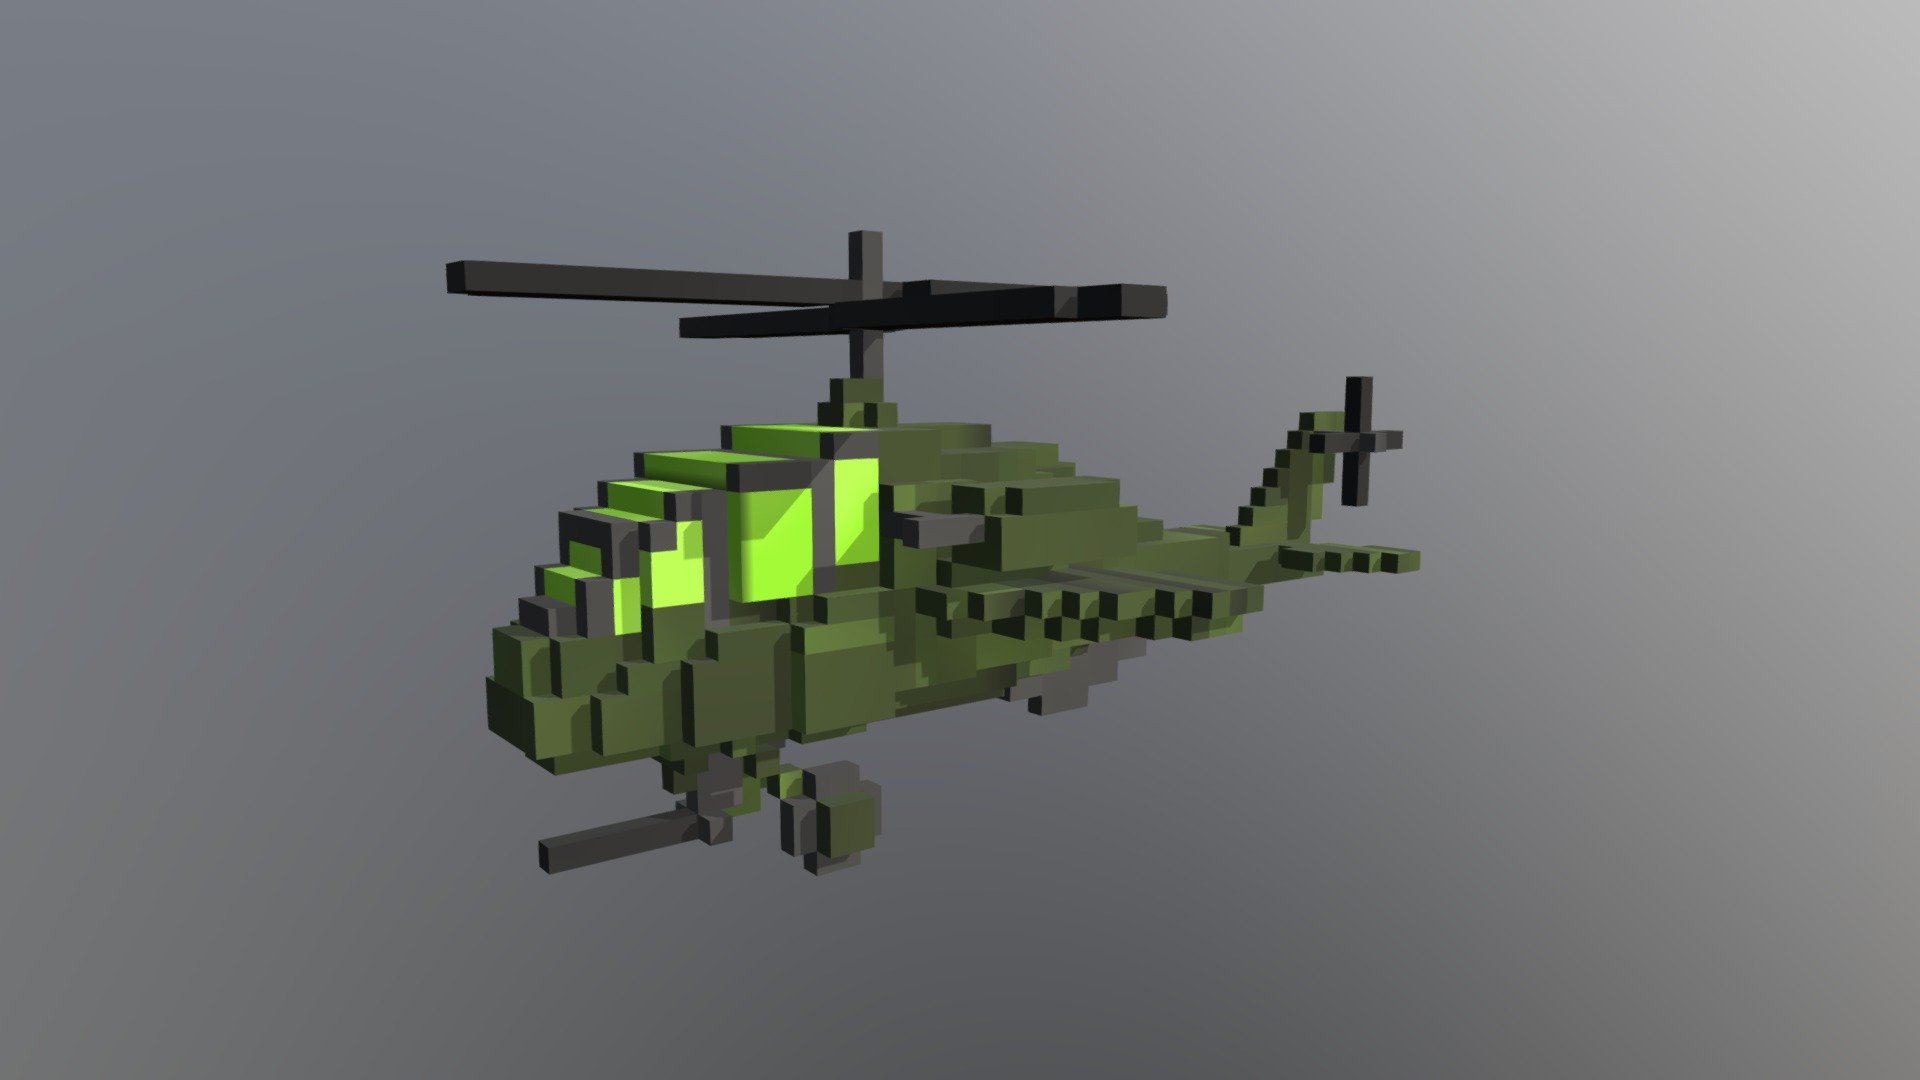 Apache Helicopter